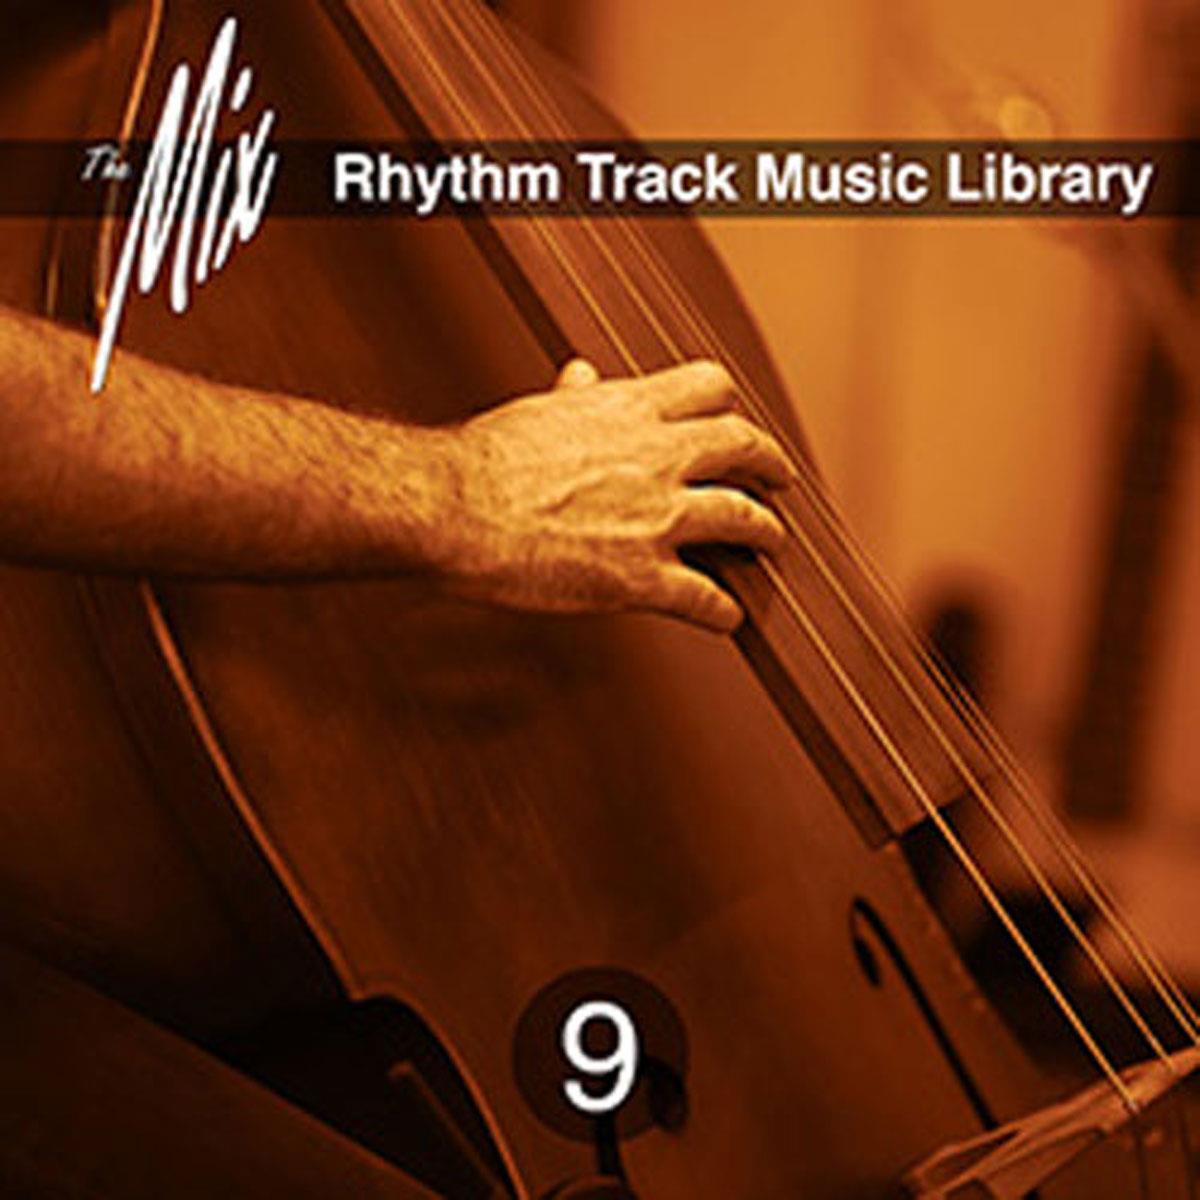 Image of Sound Ideas Mix IX Rhythm Track Royalty Free Production Music Library on CD